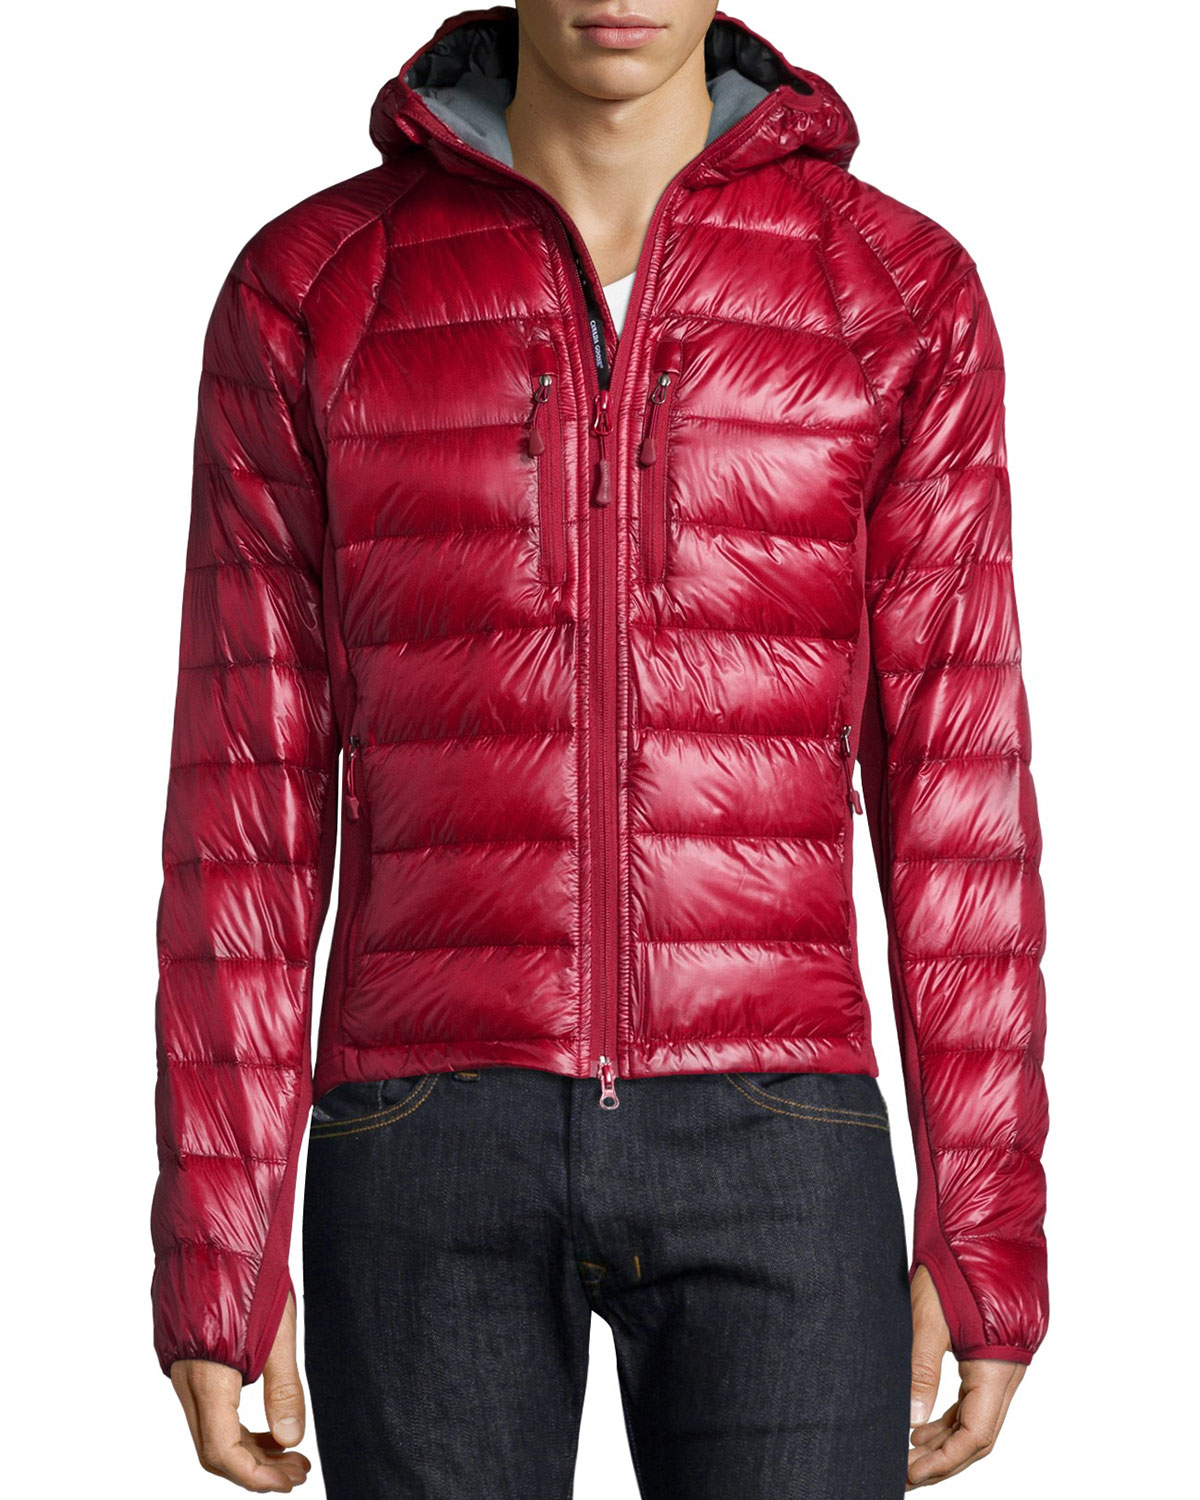 Canada Goose mens sale official - Canada Goose Men Red Related Keywords & Suggestions - Canada Goose ...